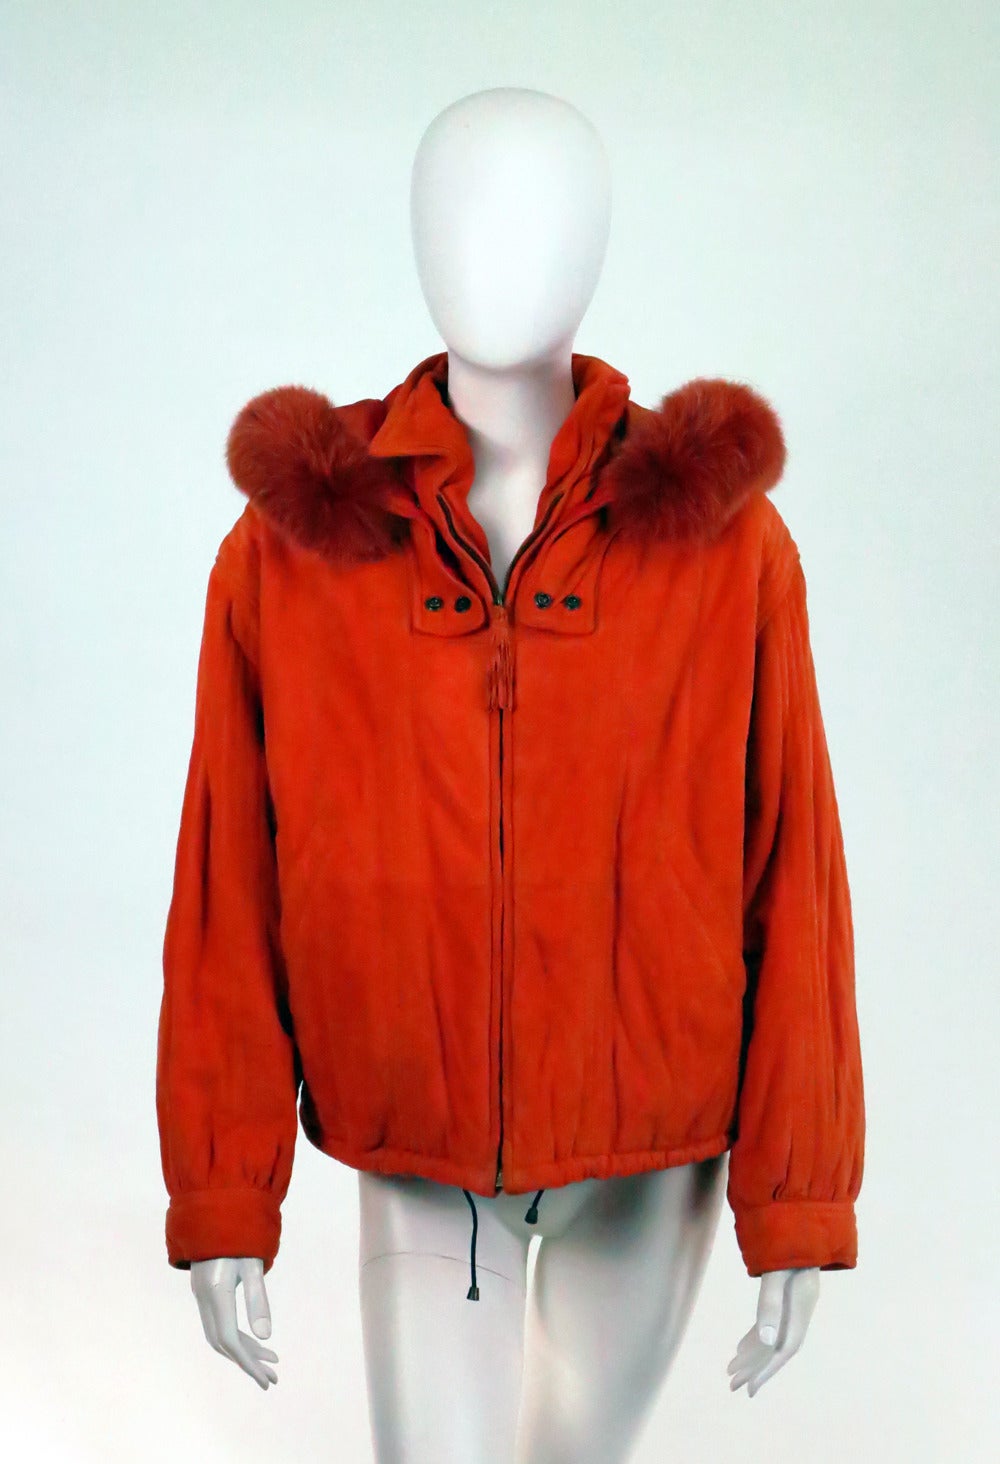 Buttery soft suede in Persimmon with a removable hood trimmed in dyed fox...From the 1970s...Made by Oggi, Italy...The jacket closes at the front with a tasseled zipper...Vertical quilt stitch details...There are angled, banded front pockets...The